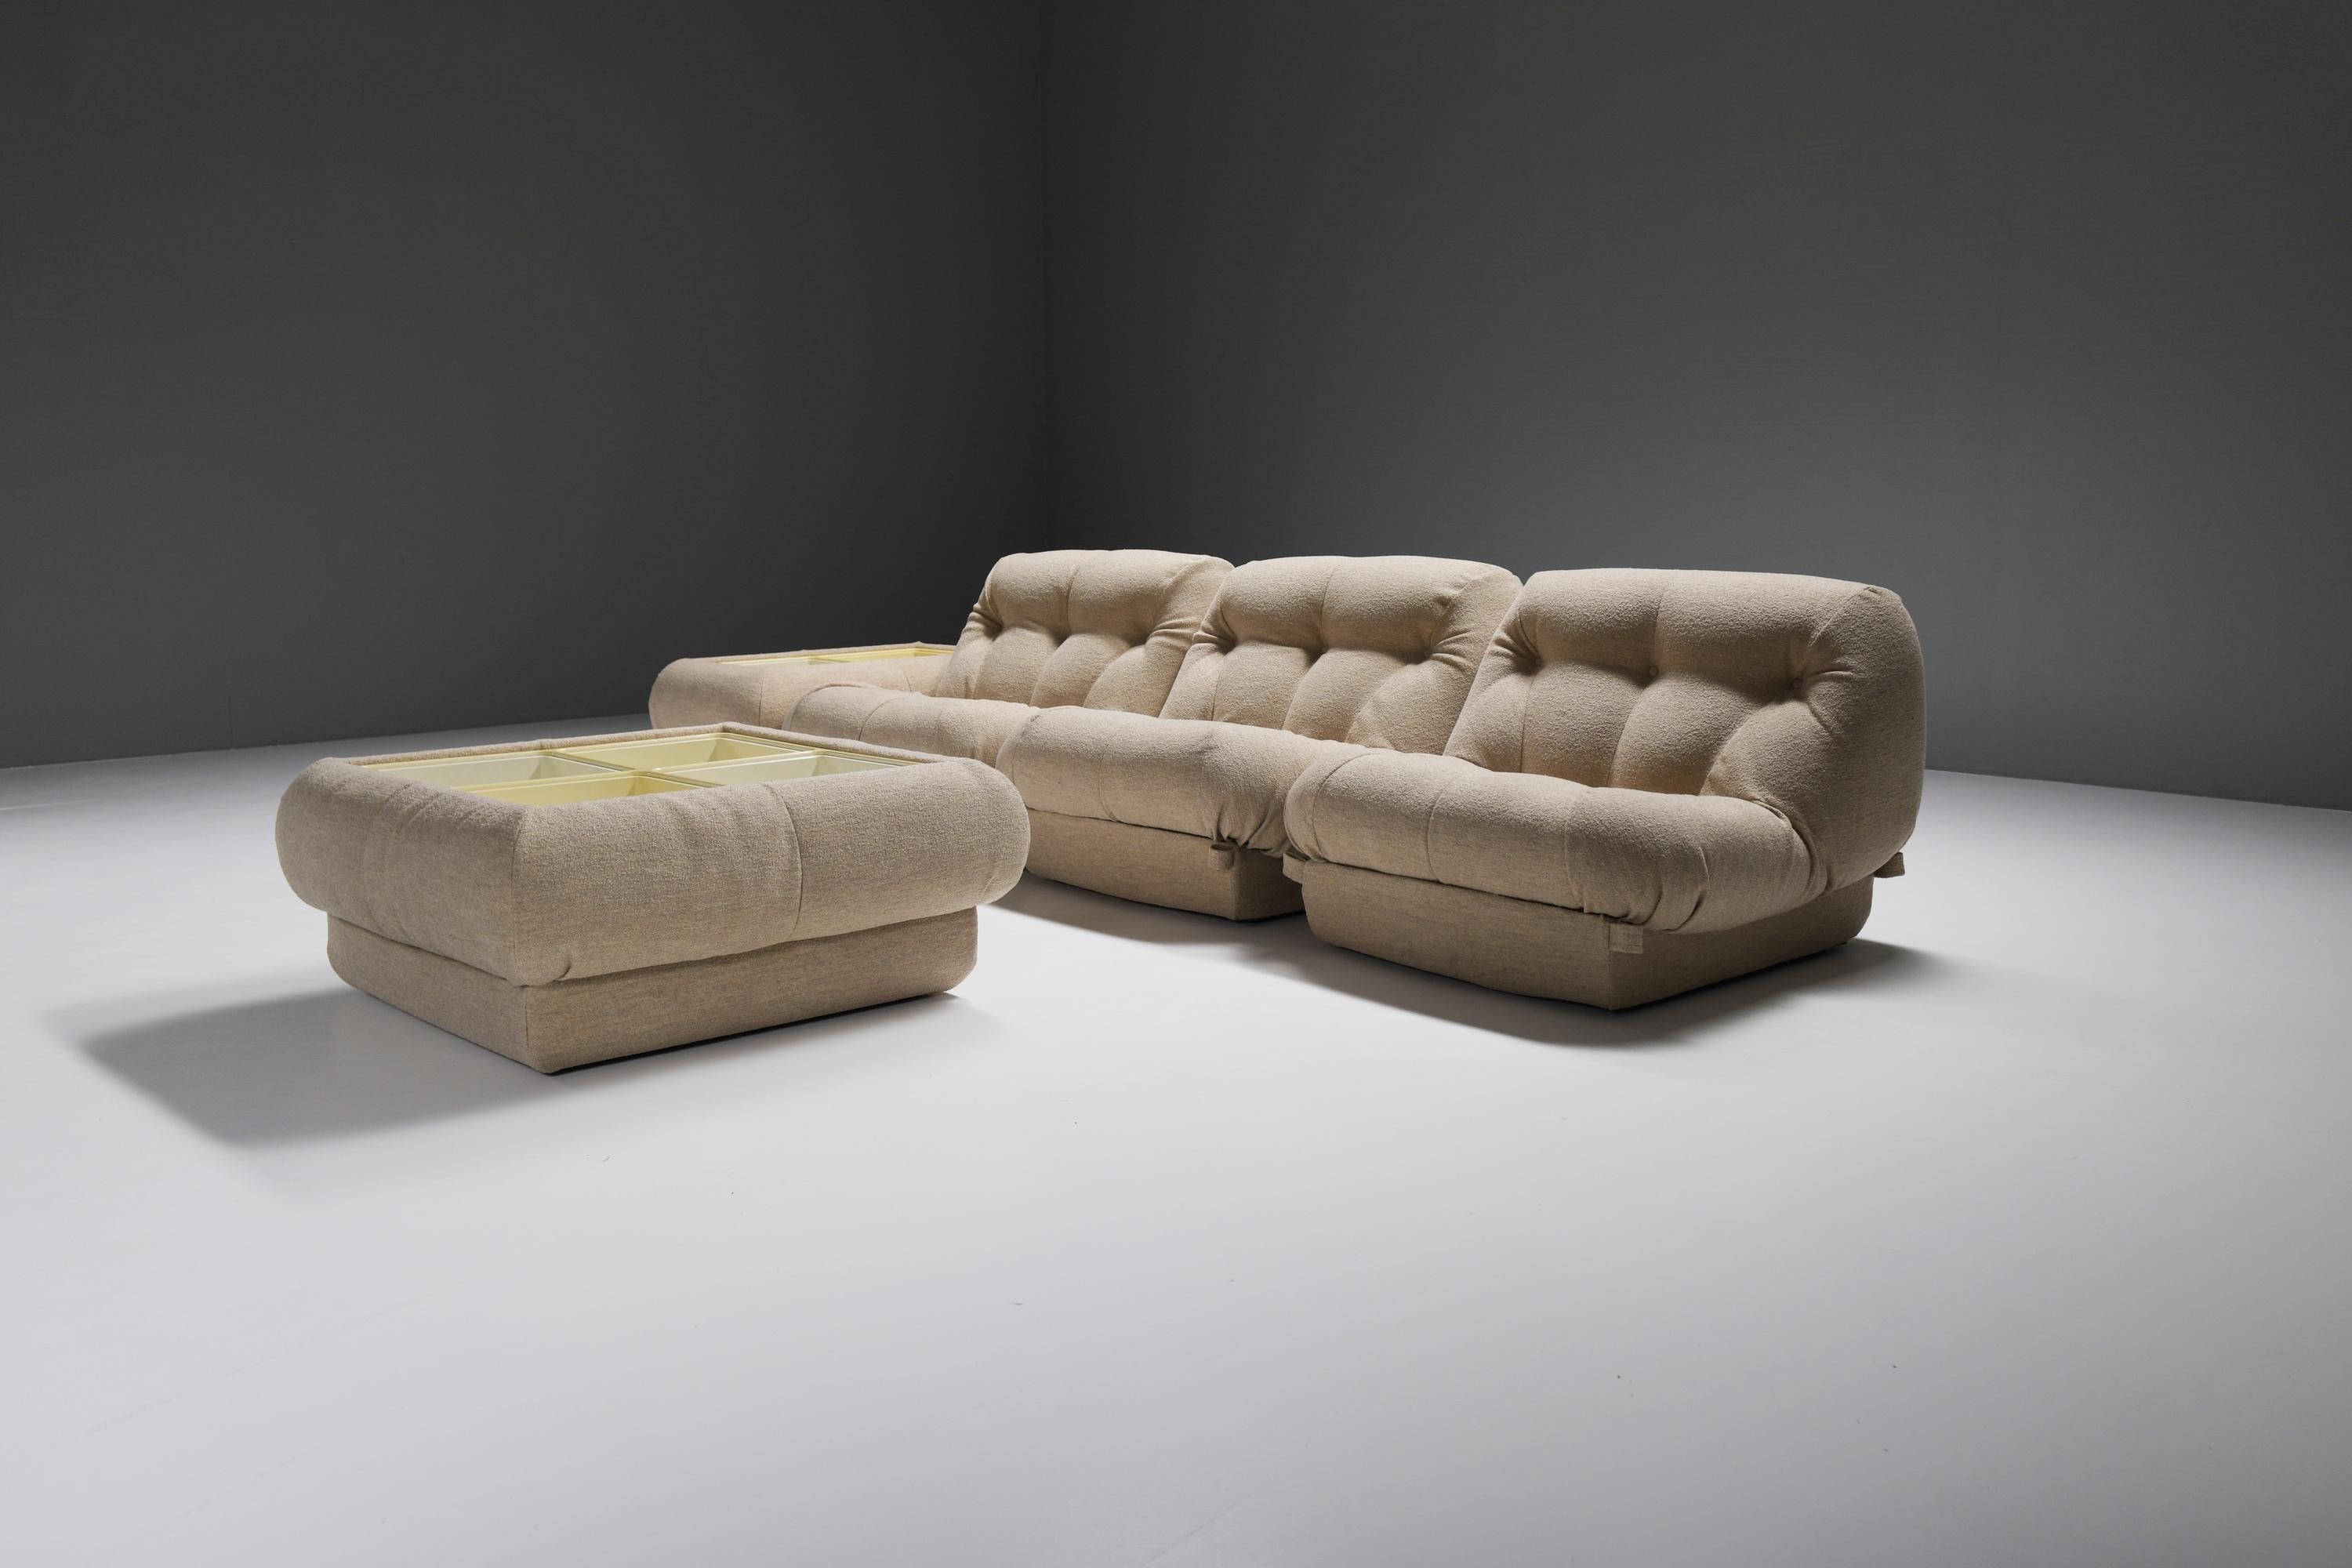 Nice set of matching Nuvolone chairs & coffee tables in a new bouclé-style fabric.
This modular sofa was designed by Rino Maturi for MiMo Padova Italy - 1970s

Internal structure in polyurethane foam.
Design inspired by the soft clouds from which it